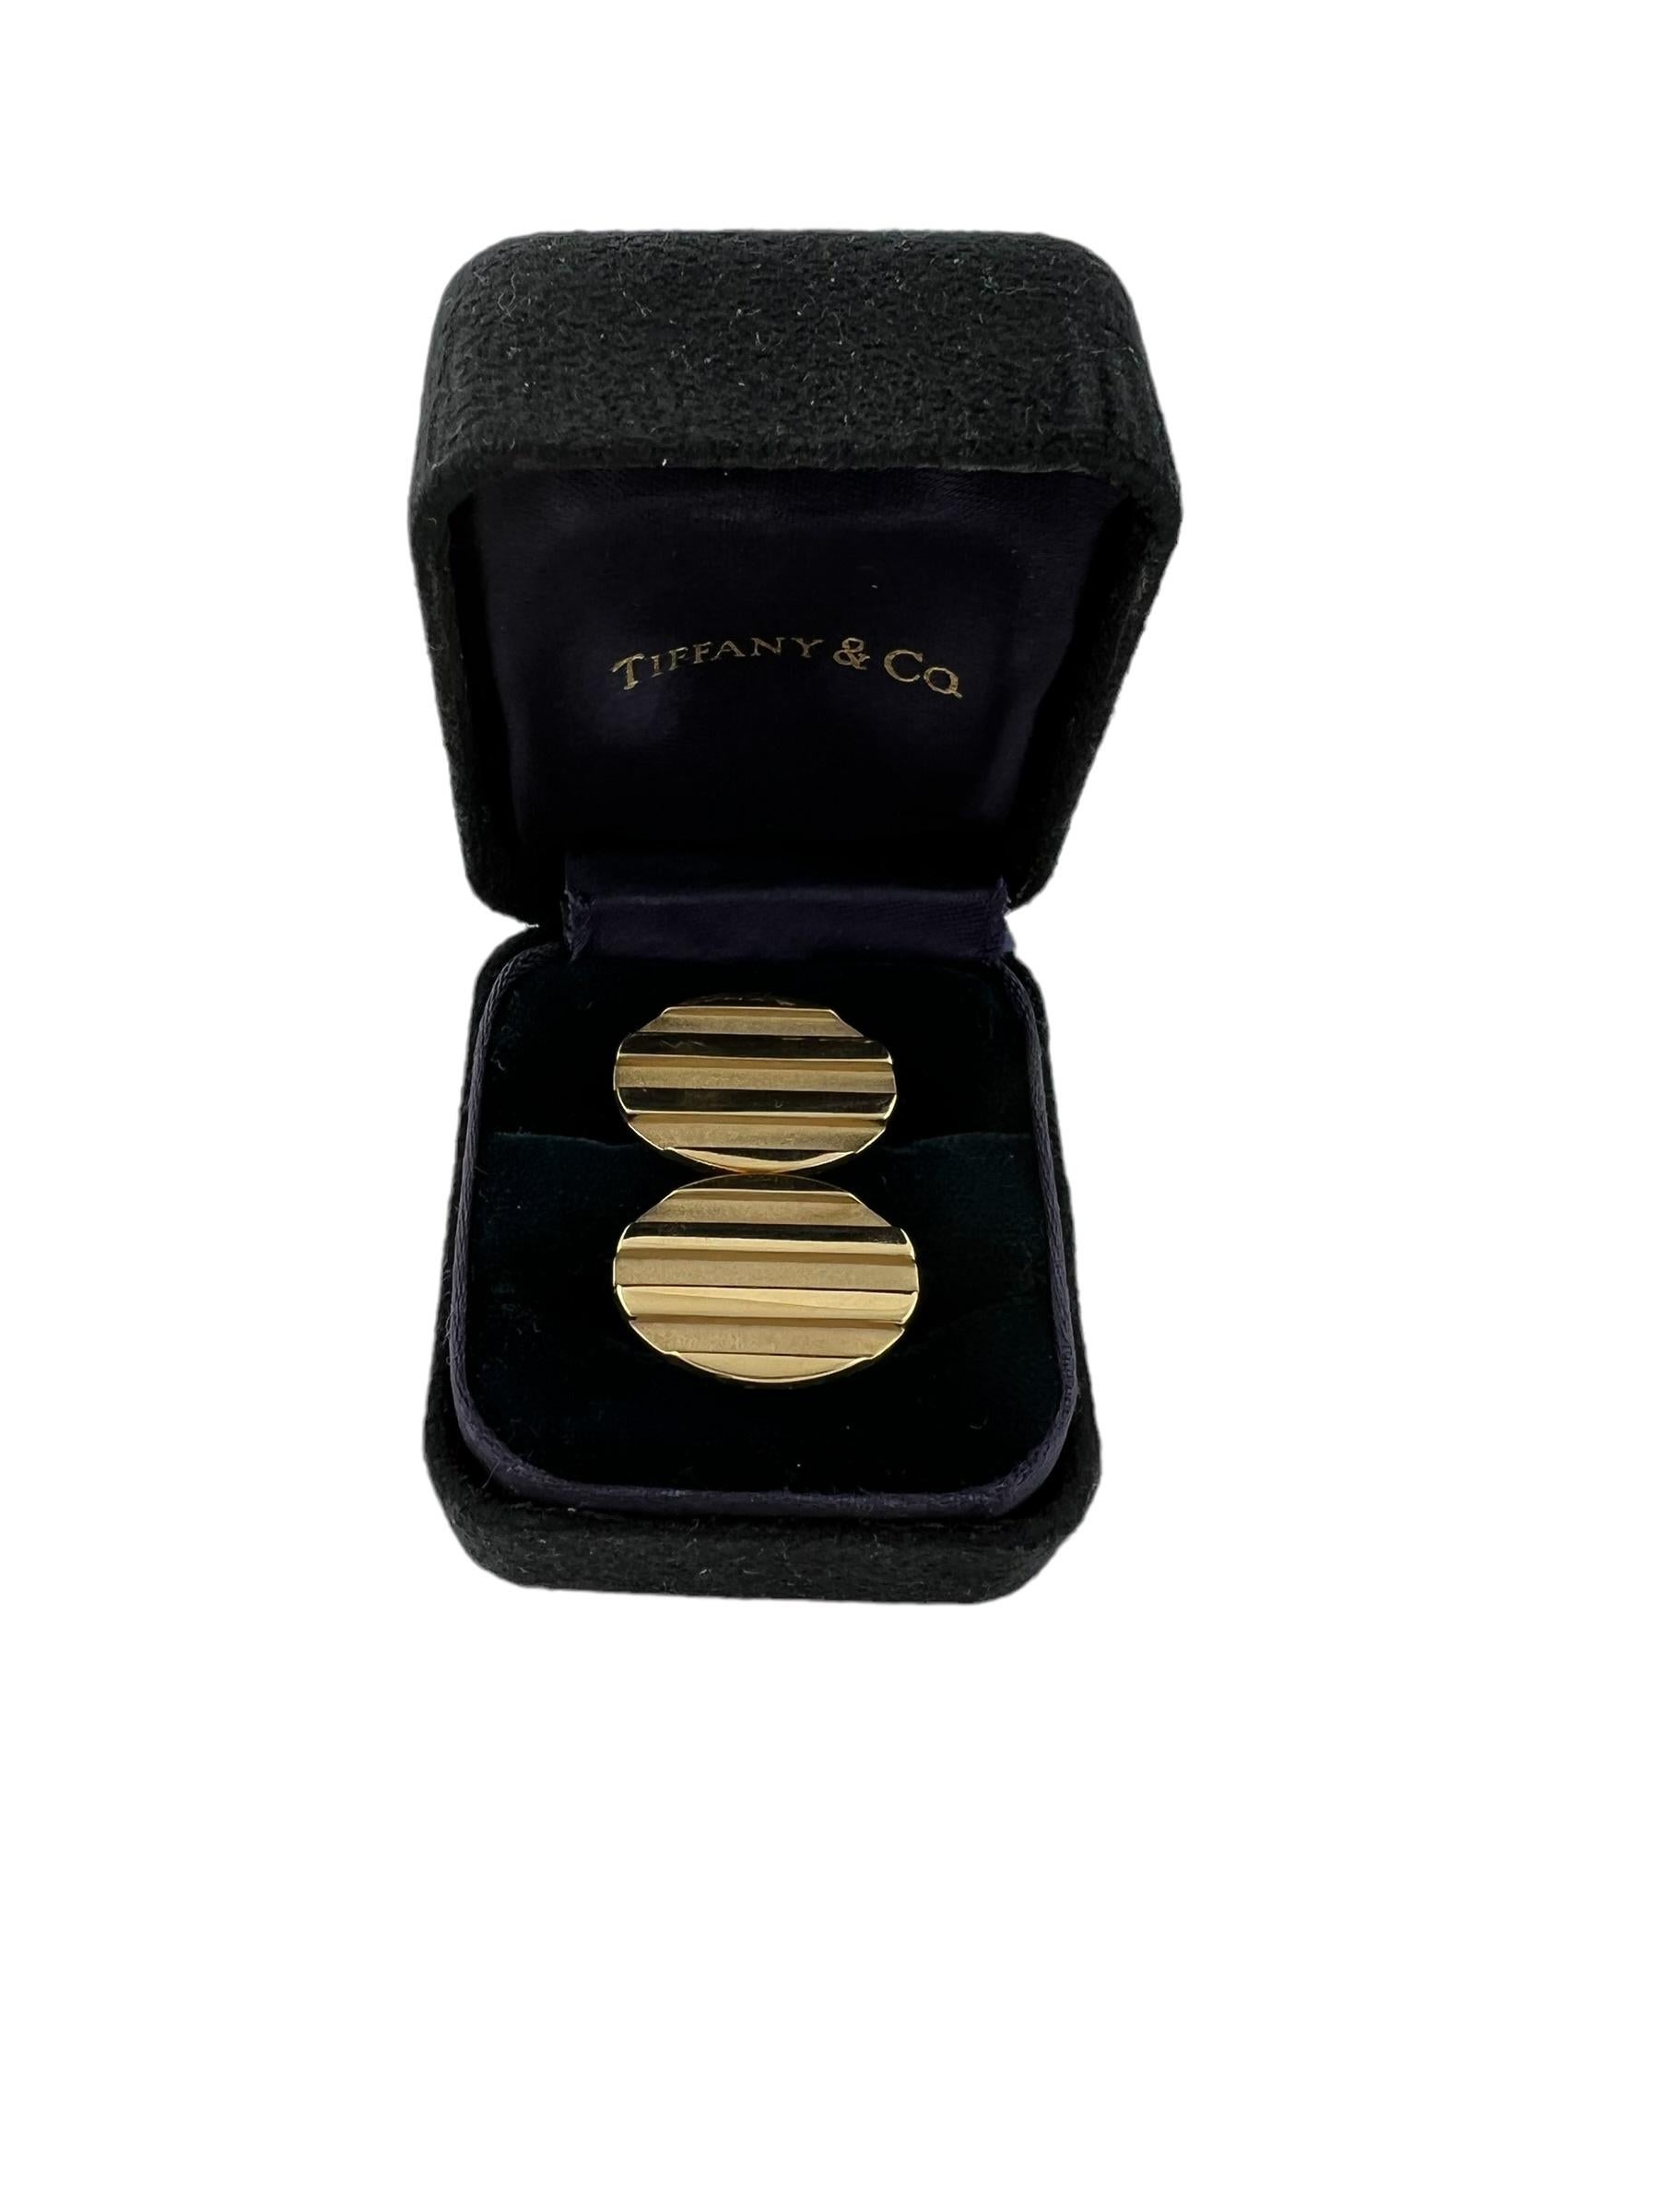 1995 Tiffany & Co. 18k Yellow Gold Oval Striped Cufflinks with Box For Sale 5